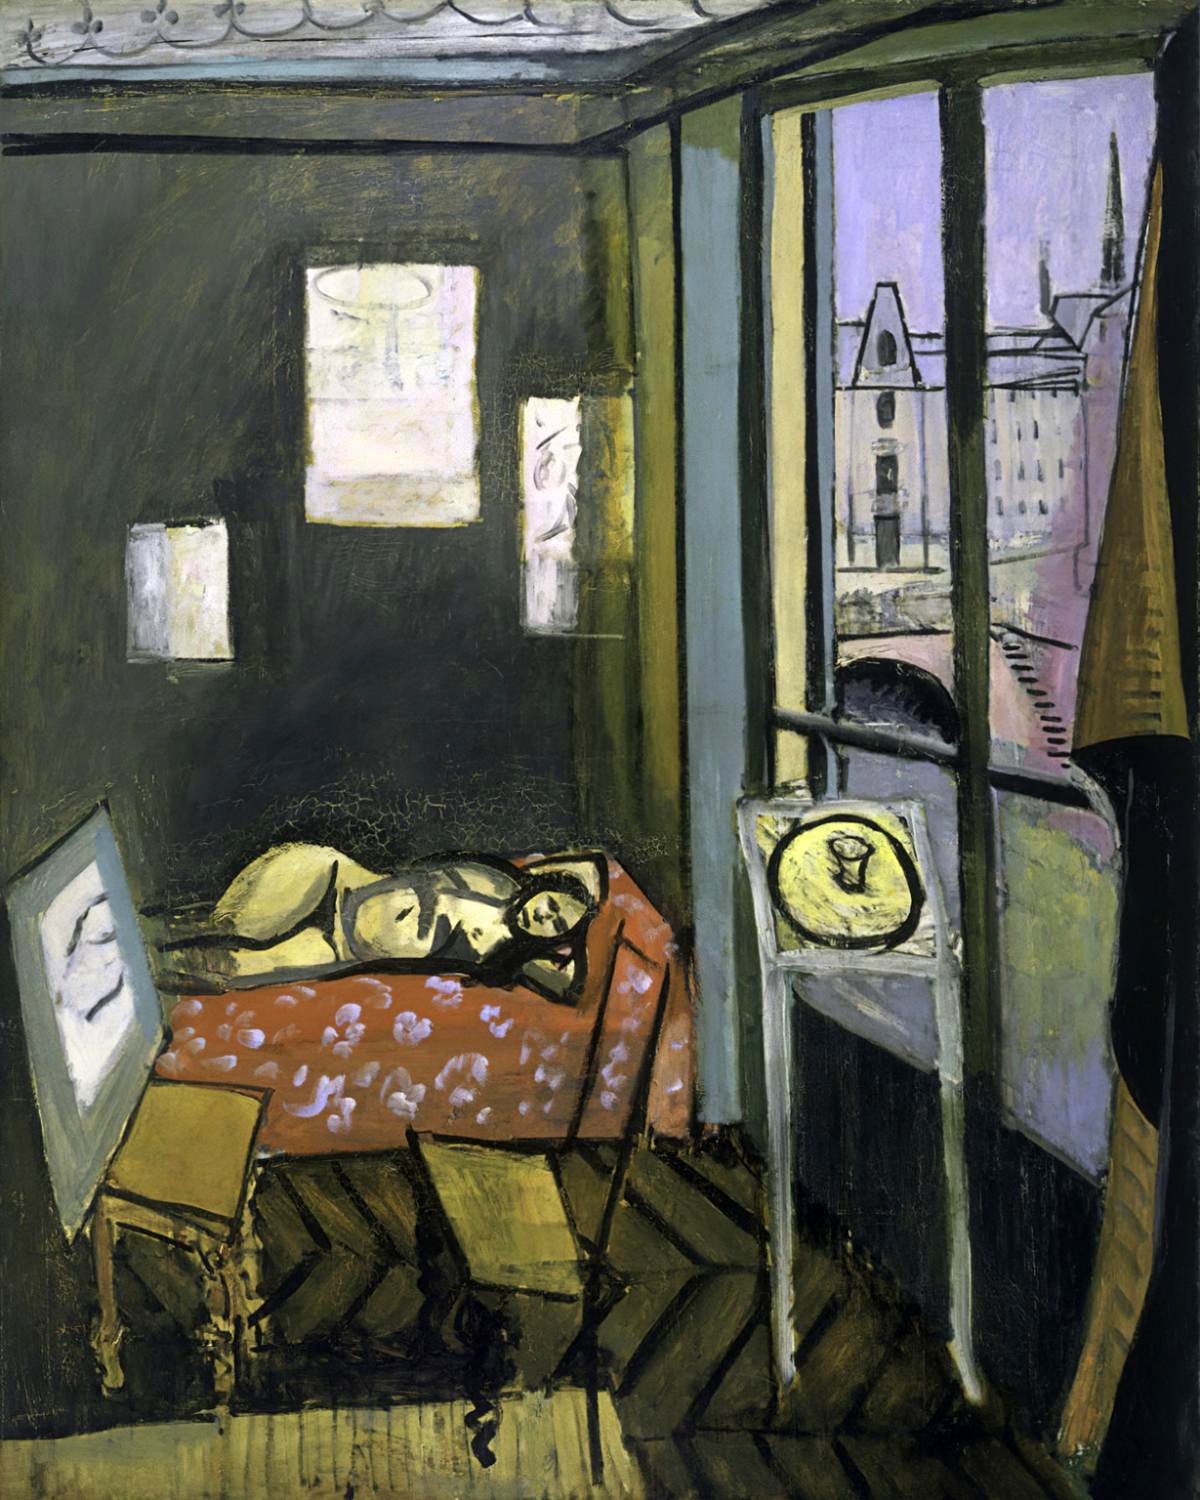 This image is Henri Matisse's painting "Studio, Quai Saint-Michel" from 1916. It shows a somber interior scene with a reclining figure, likely his model Laurette, on a couch with a red patterned cover. The room is defined by dark vertical and horizontal lines, with dark, muted colors. On the left, artworks are faintly visible against the shadowy wall. A large window opens to a view of Paris, with the Palais du Justice and Sainte Chapelle visible in the distance, bathed in a soft lavender hue. The painting captures the blend of the interior studio space with the exterior urban landscape, unified through Matisse's window motif. Shadows on the figure and the wall indicate reworking by the artist, and a propped canvas on a chair suggests the presence of the artist himself. The work is a study in the integration of representational and abstract elements, reflecting the complex relationship between the artist's inner world and the external environment.